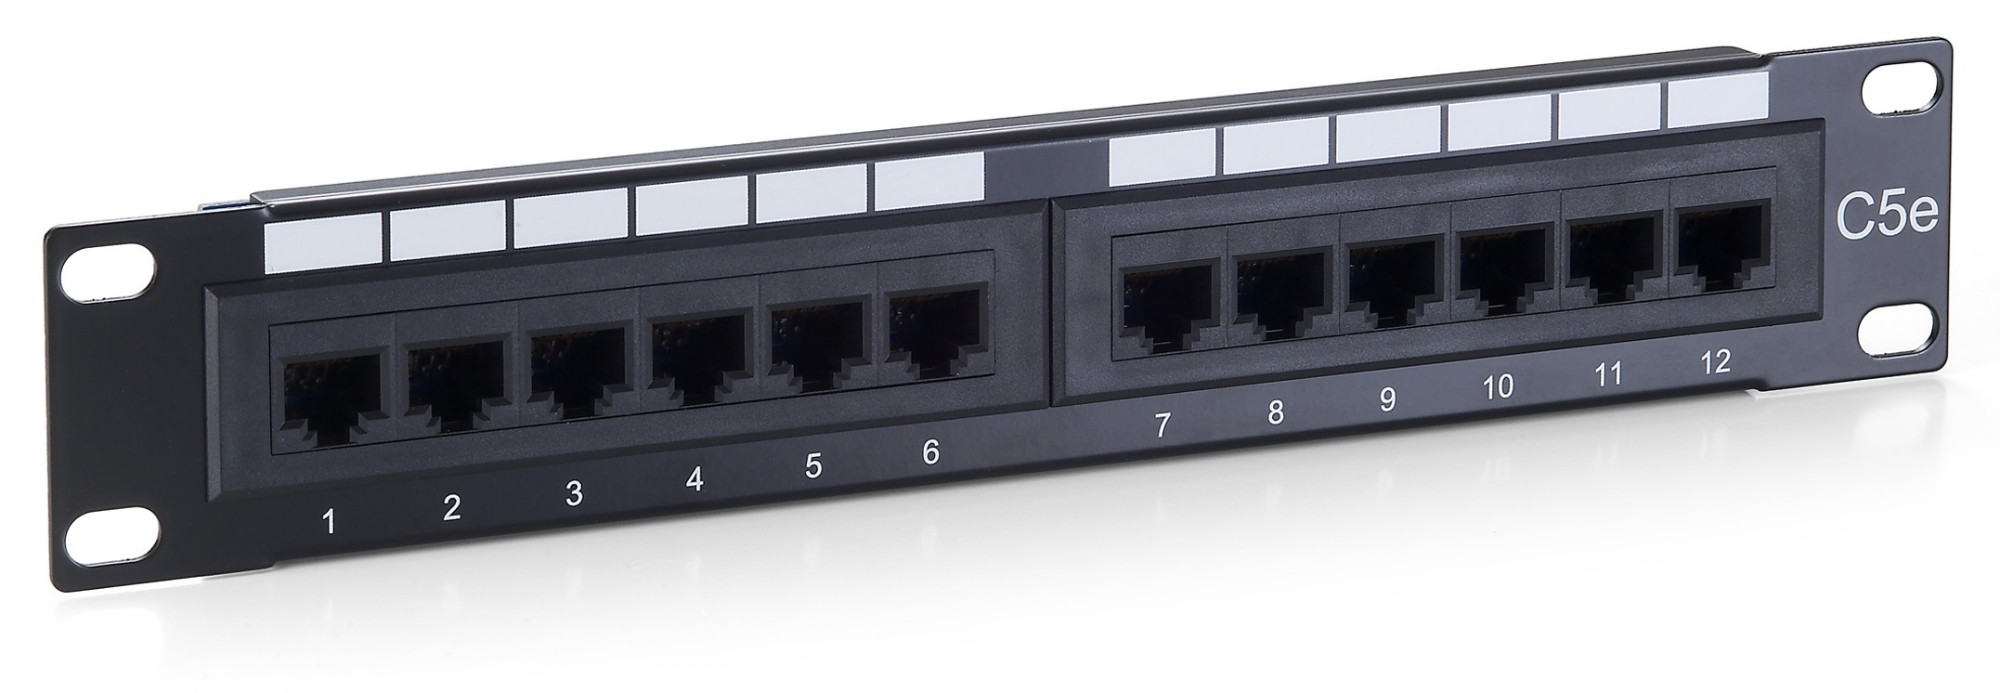 Photos - Other network equipment Equip 12-Port Cat.5e Unshielded Patch Panel, Black 208015 